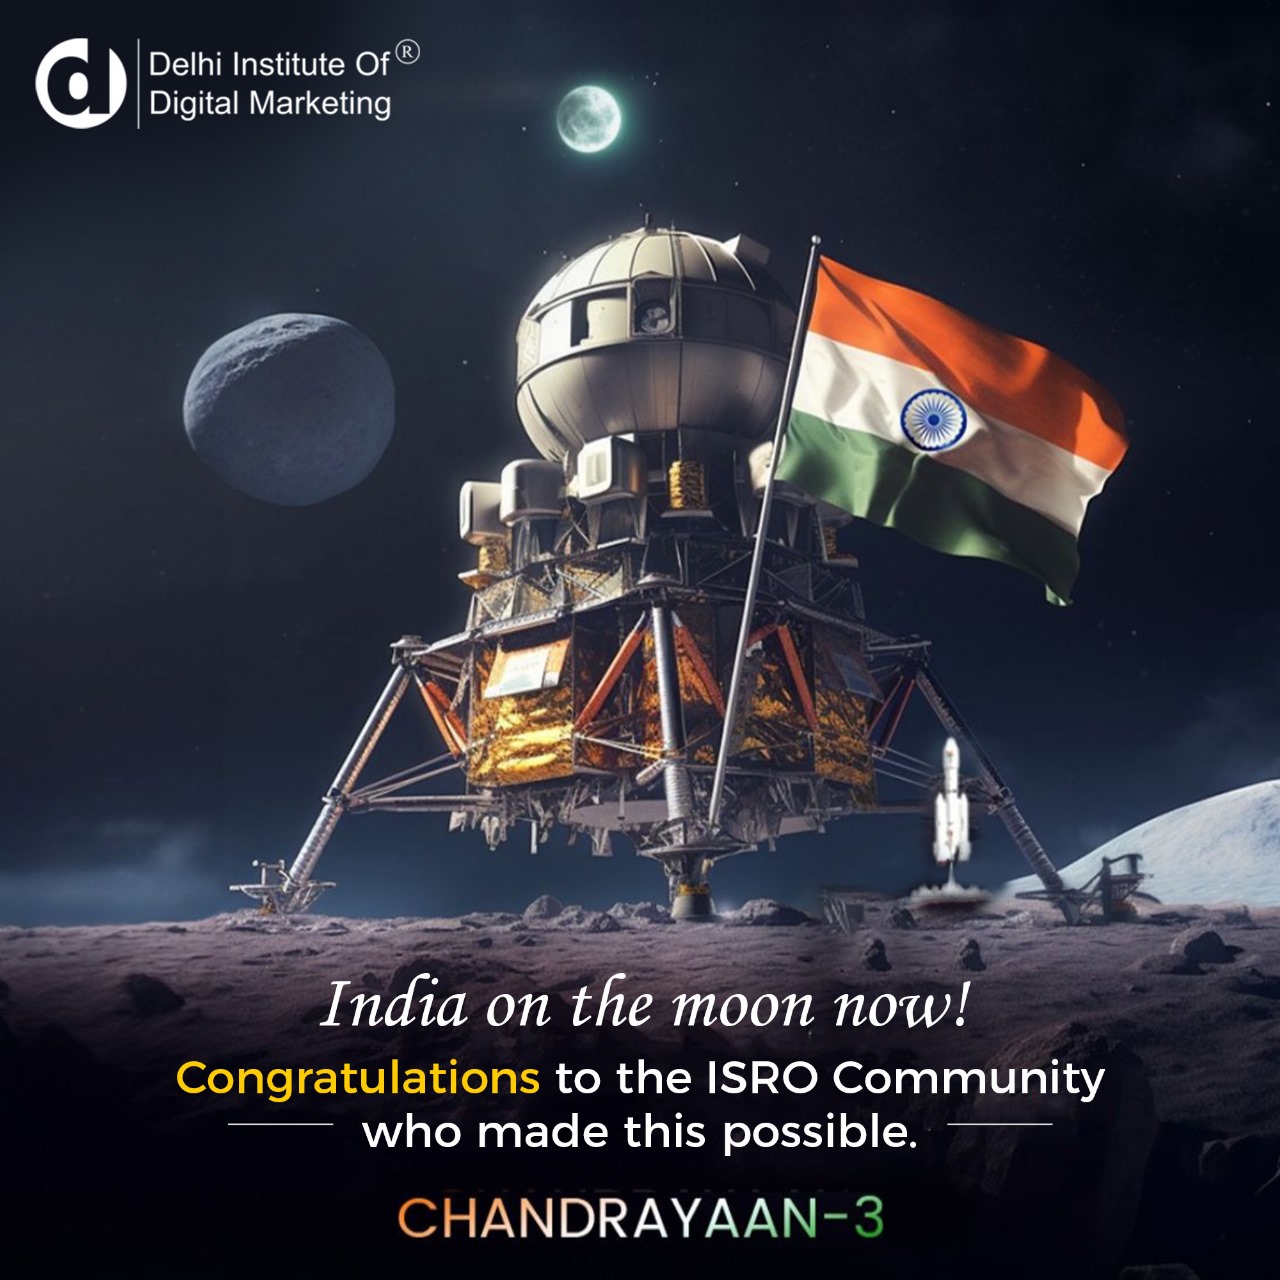 Congratulations to ISRO on landing Chandrayaan 3 at the South Pole of the Moon!